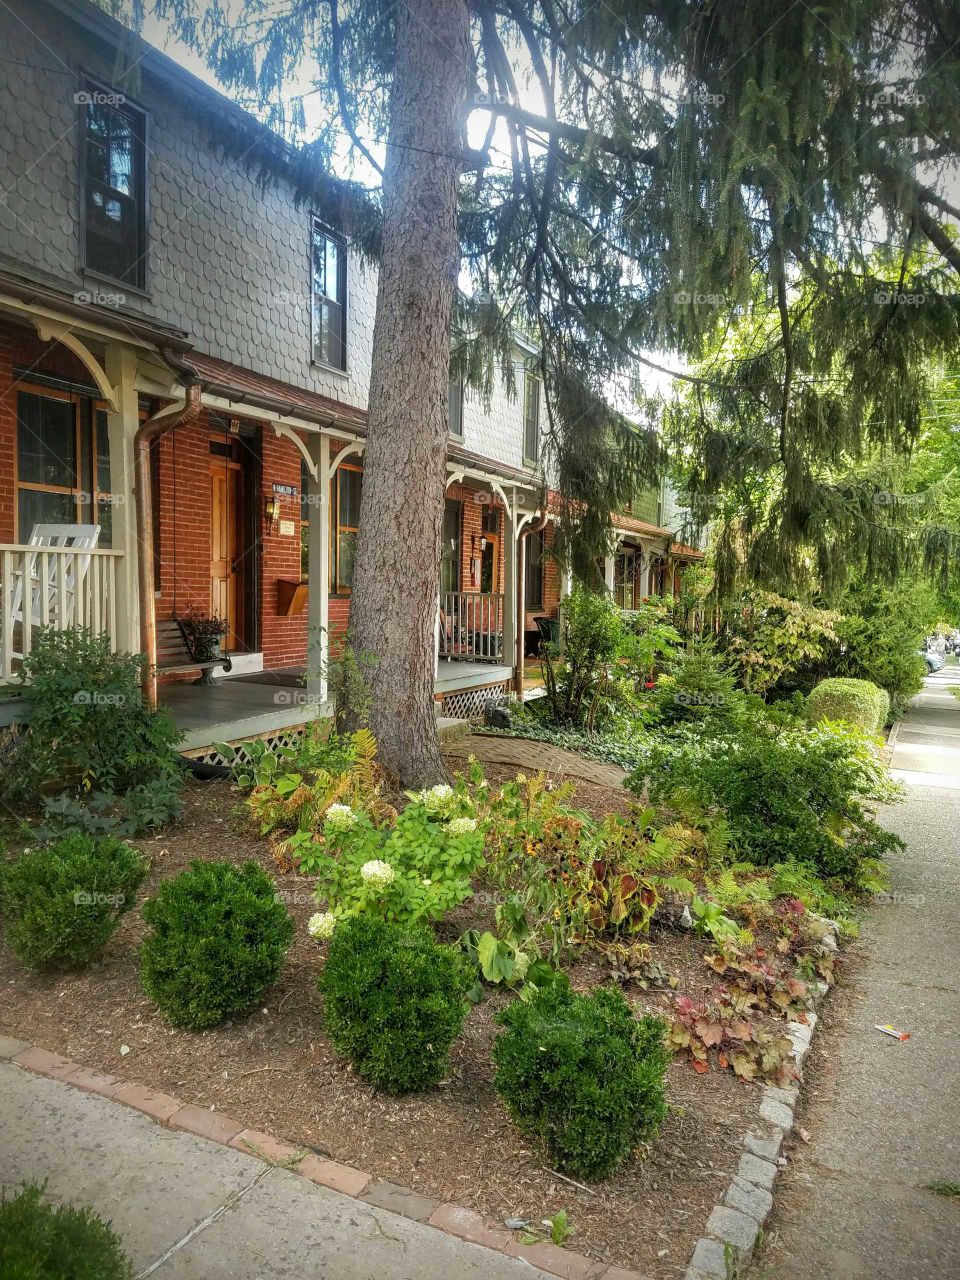 These historic row homes in Doylestown had lovely garden features instead of grass yards.